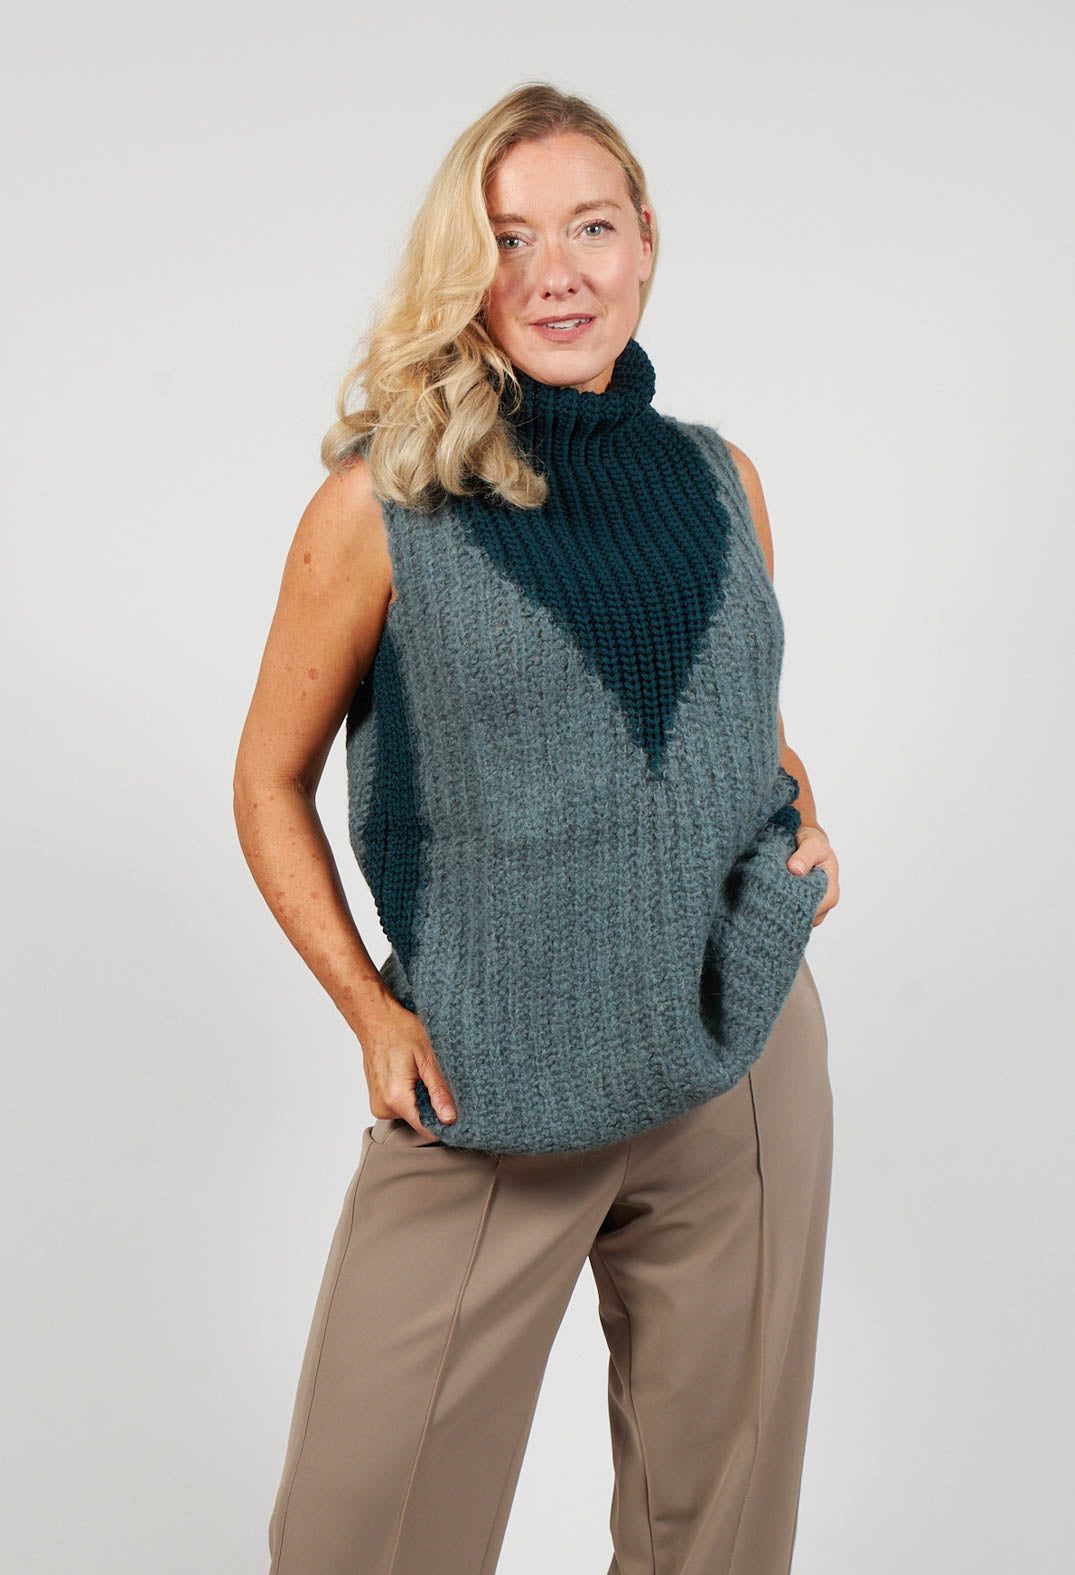 lady wearing a sleeveless knit jumper with a turtleneck in cypress shade